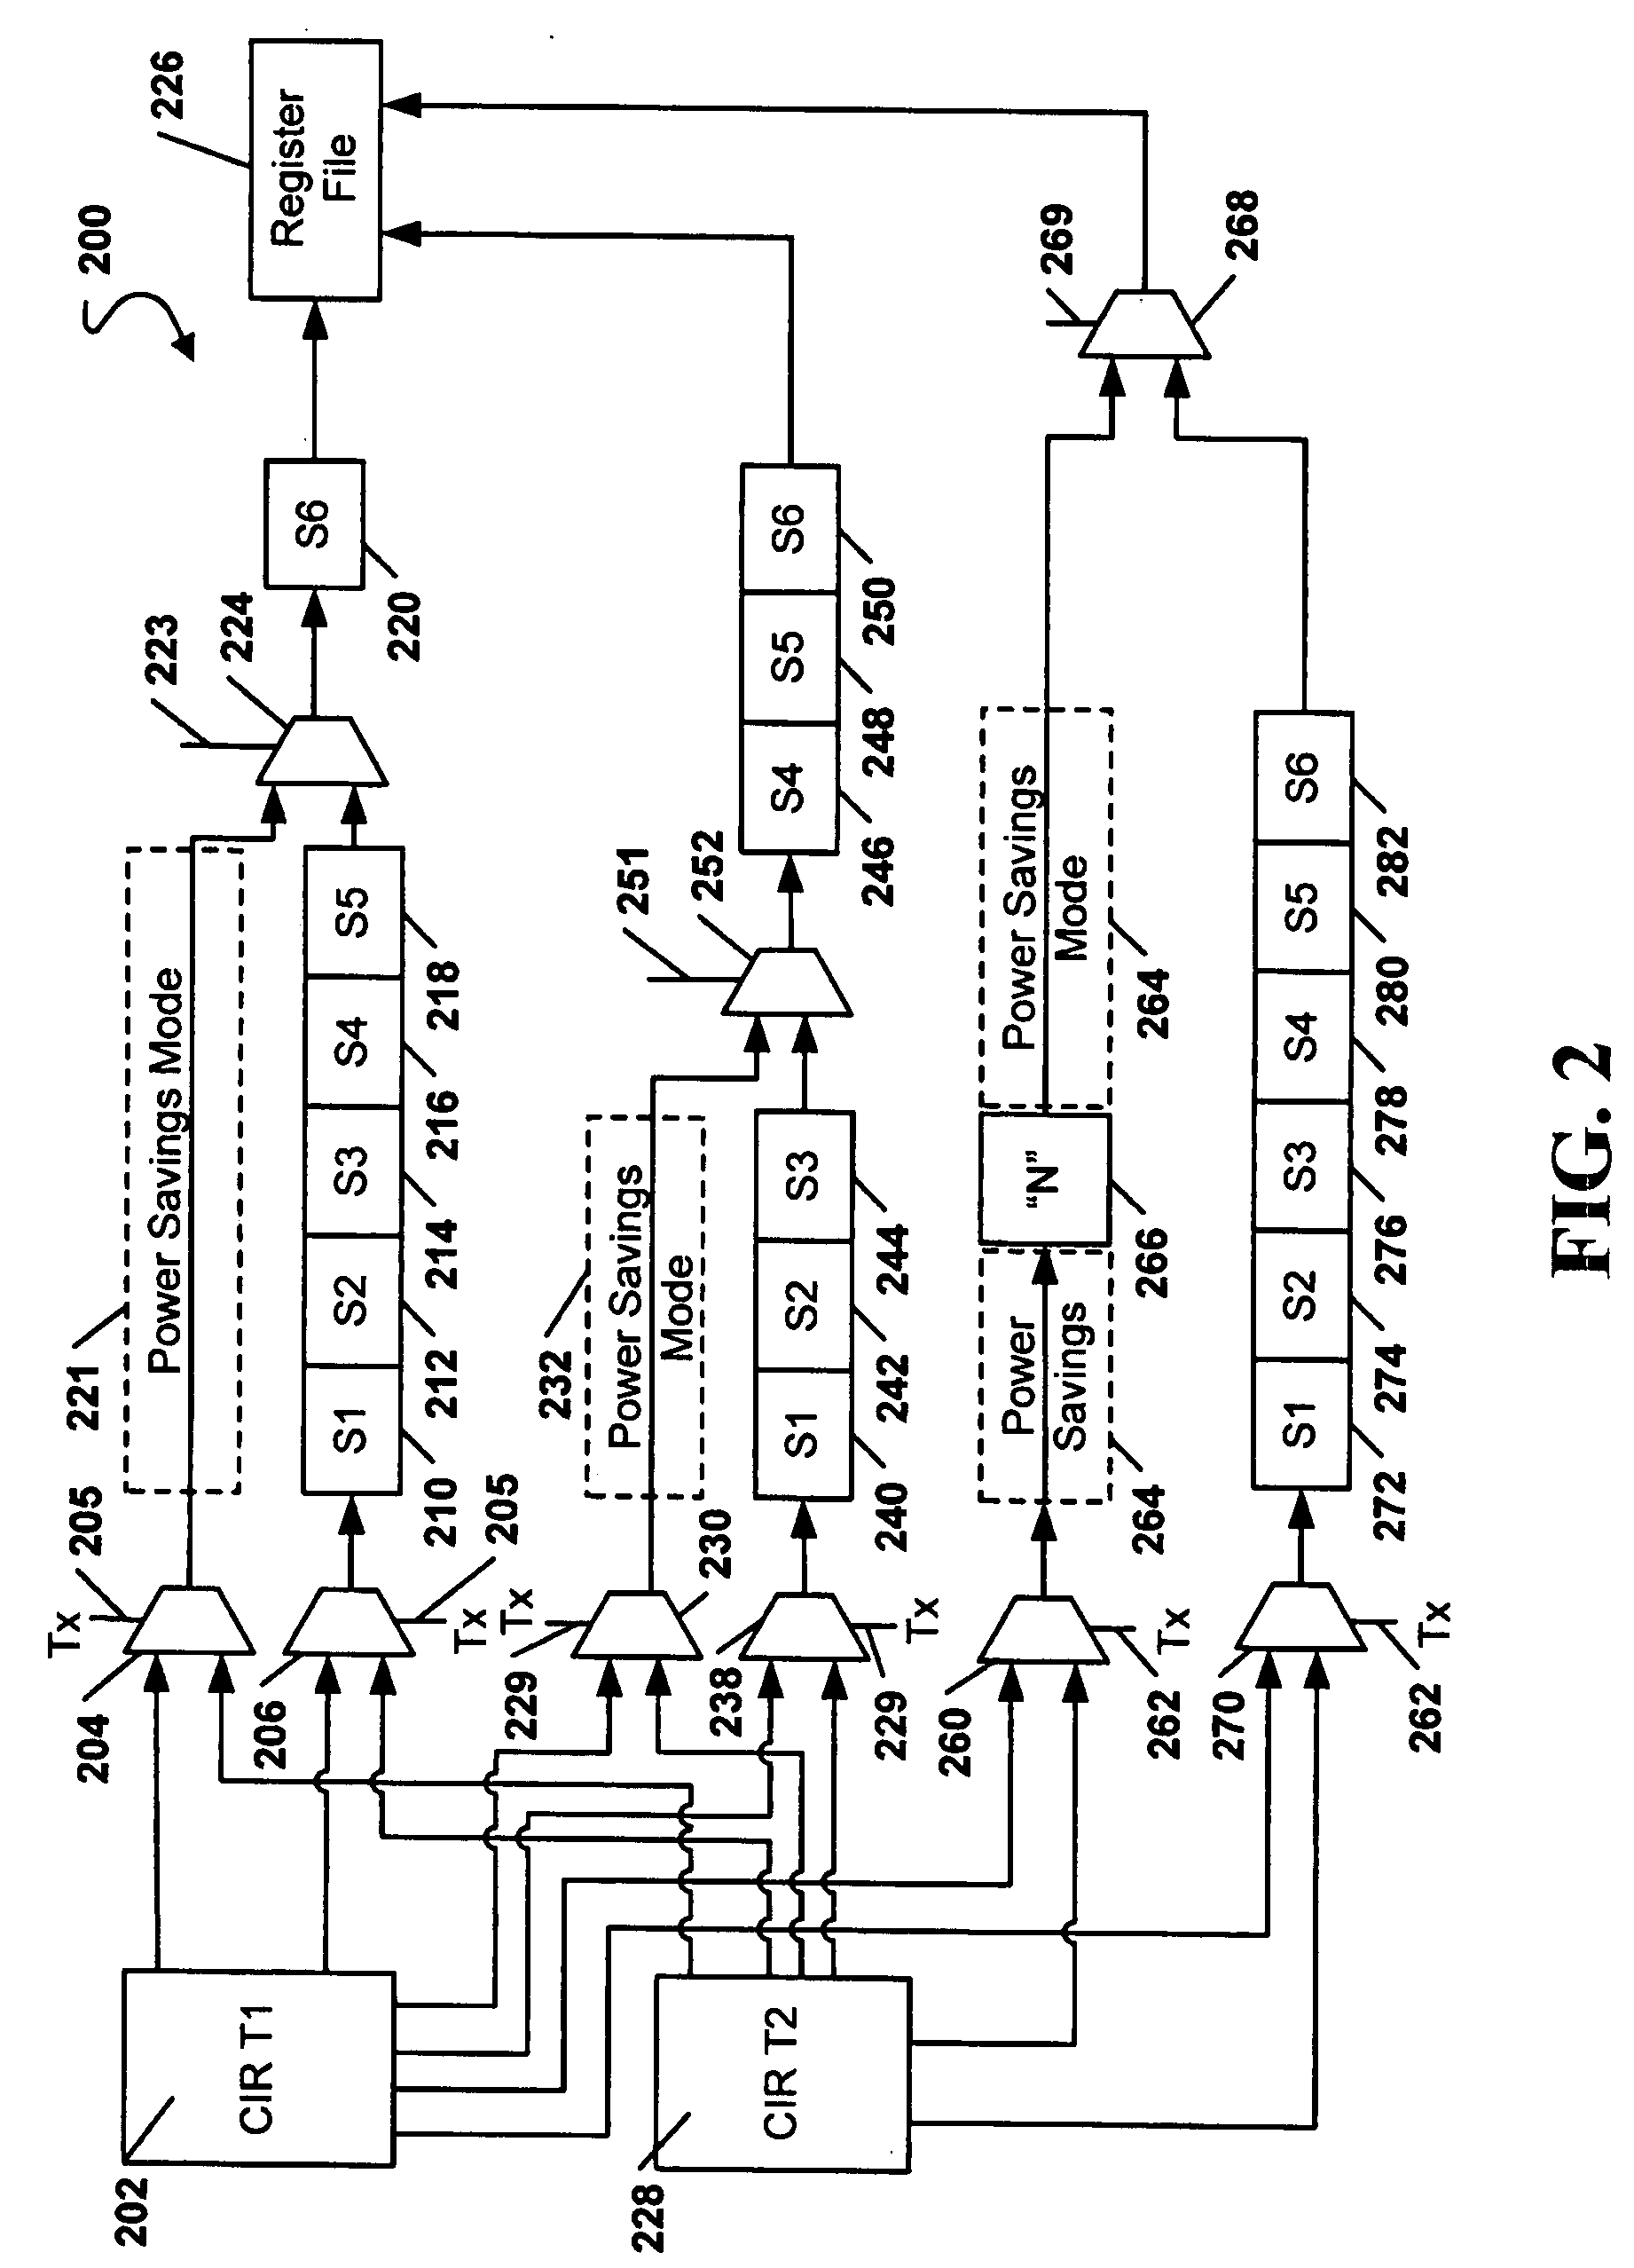 System and Method of Executing Instructions in a Multi-Stage Data Processing Pipeline